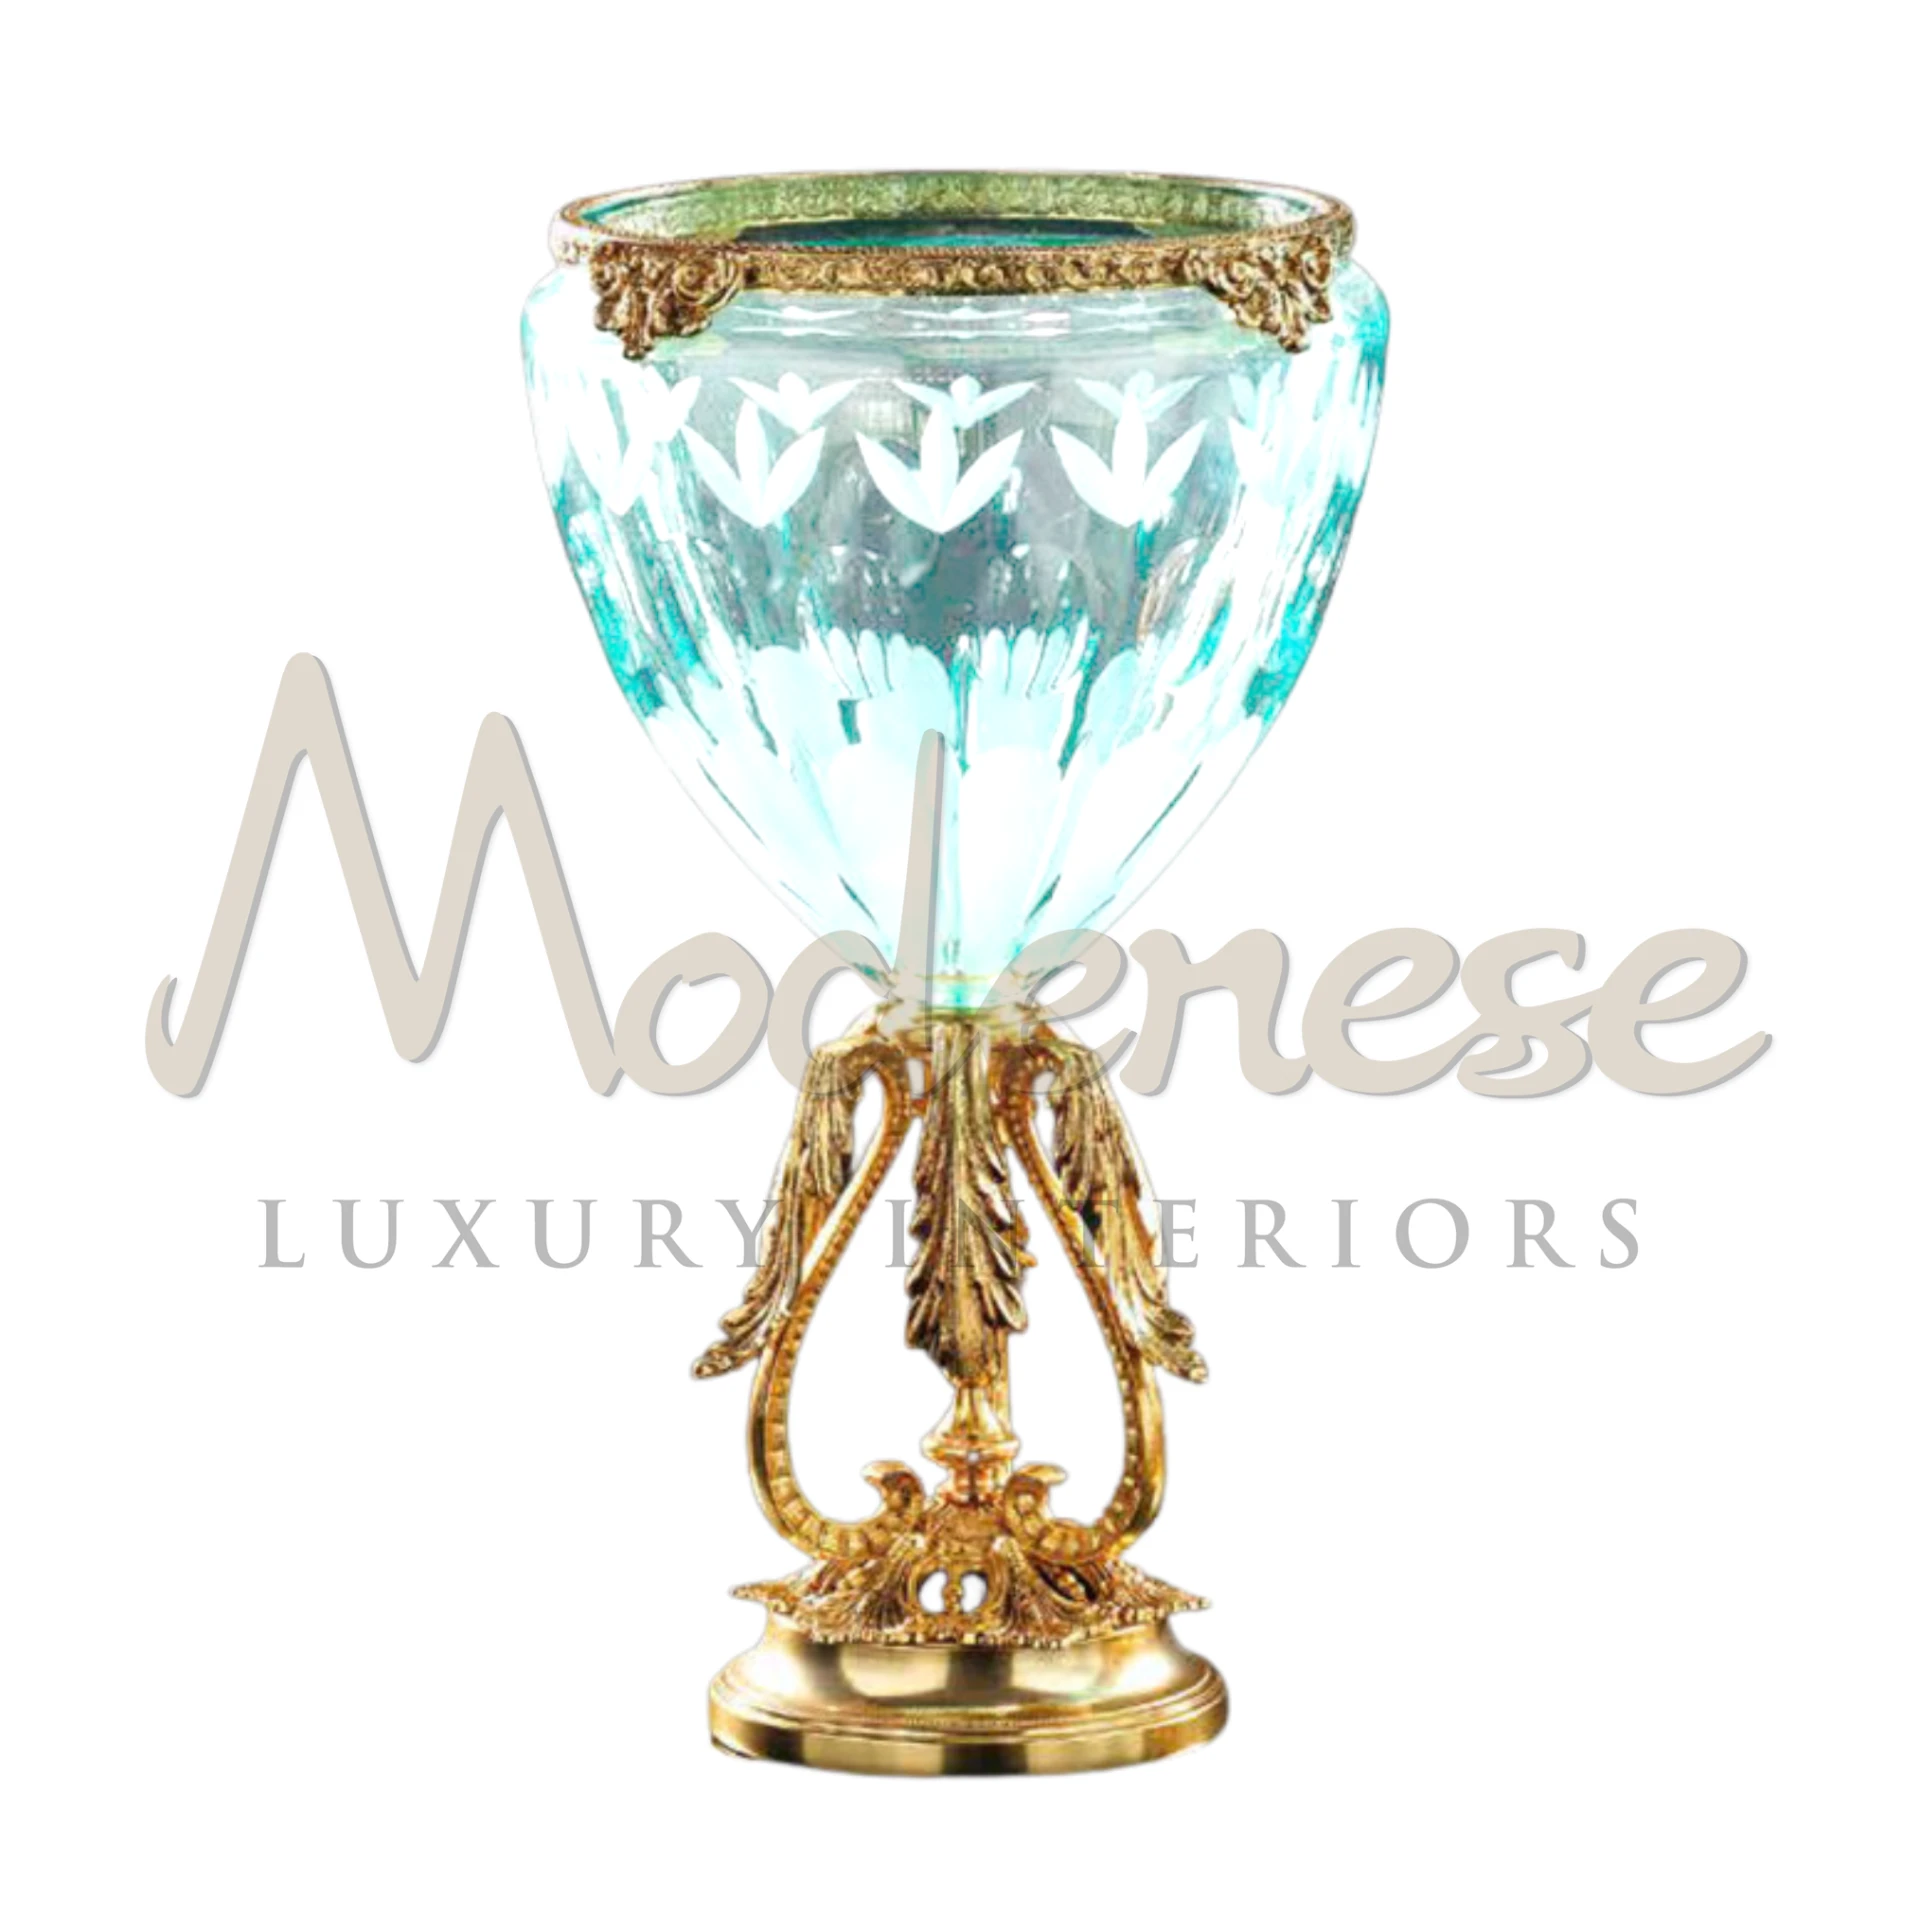 Exquisite Turquoise Vase, featuring intricate designs and high-quality craftsmanship, ideal for luxury interior design and a statement piece in porcelain.





